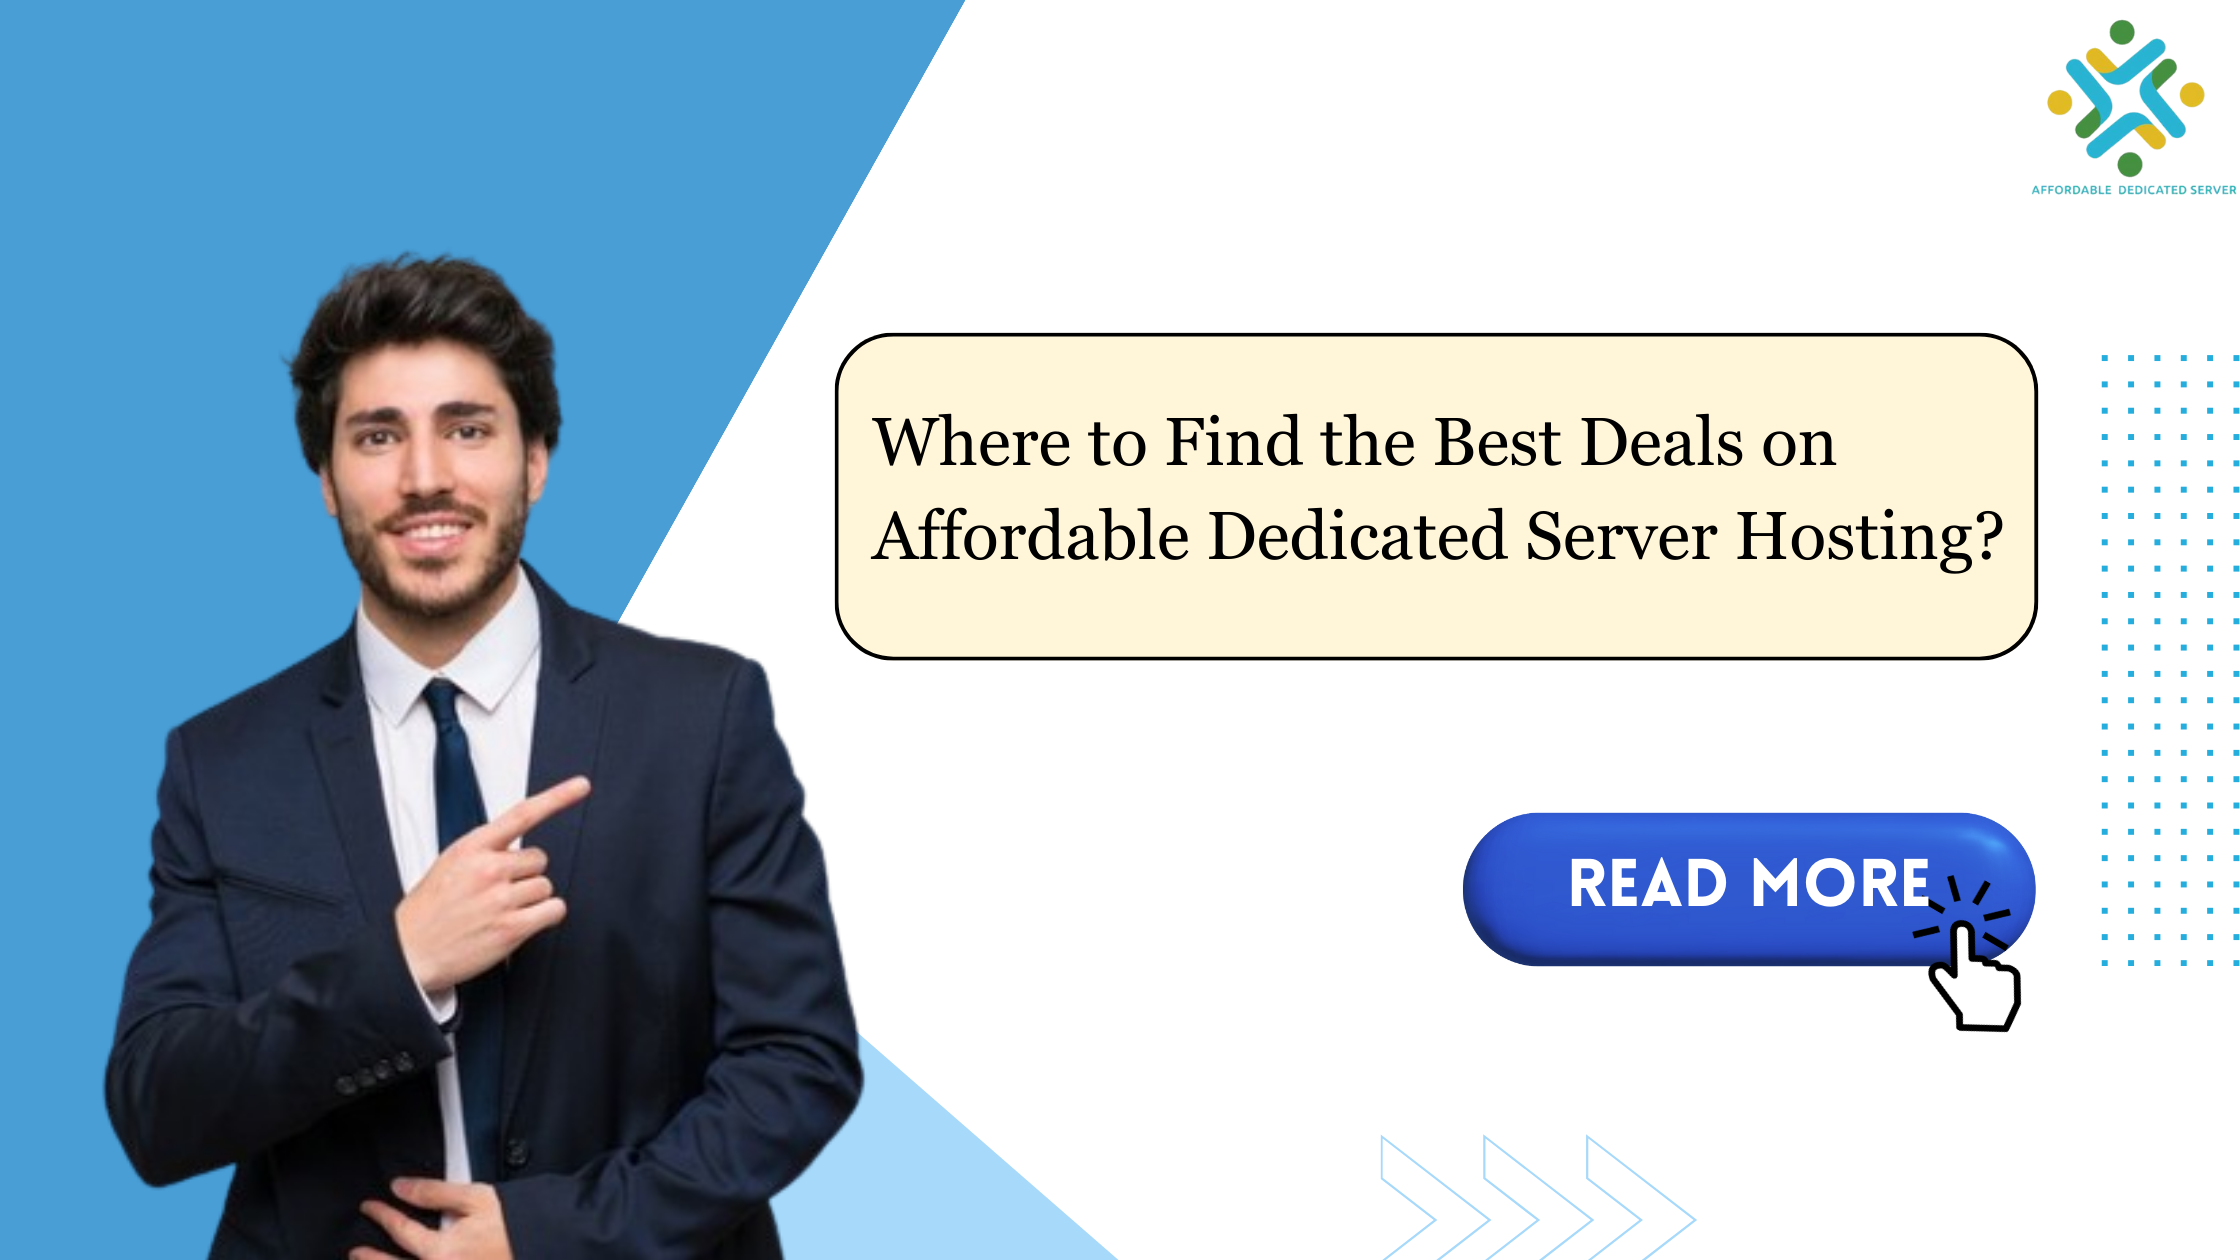 Where to Find the Best Deals on Affordable Dedicated Server Hosting